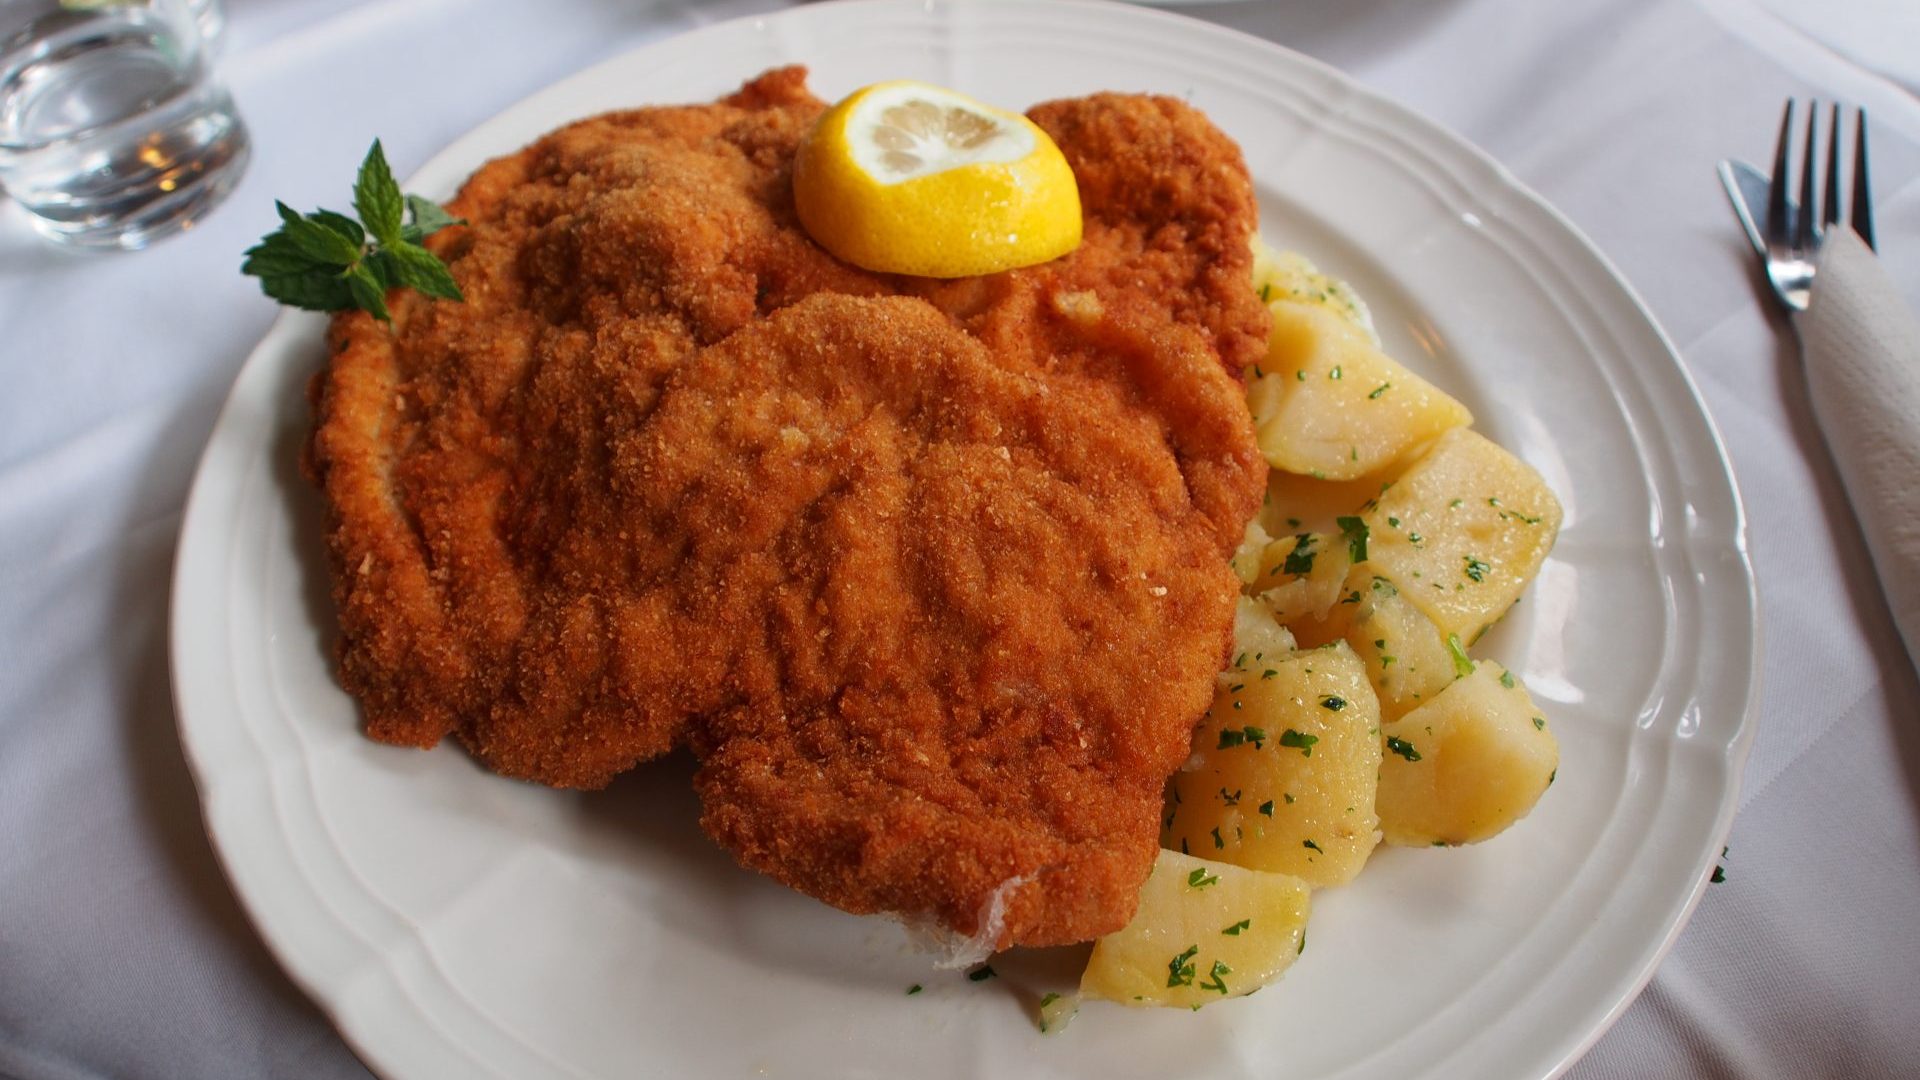 Wiener schnitzel: a necessary enjoyment but an inappropriate pre-spa dish. Photo: Getty